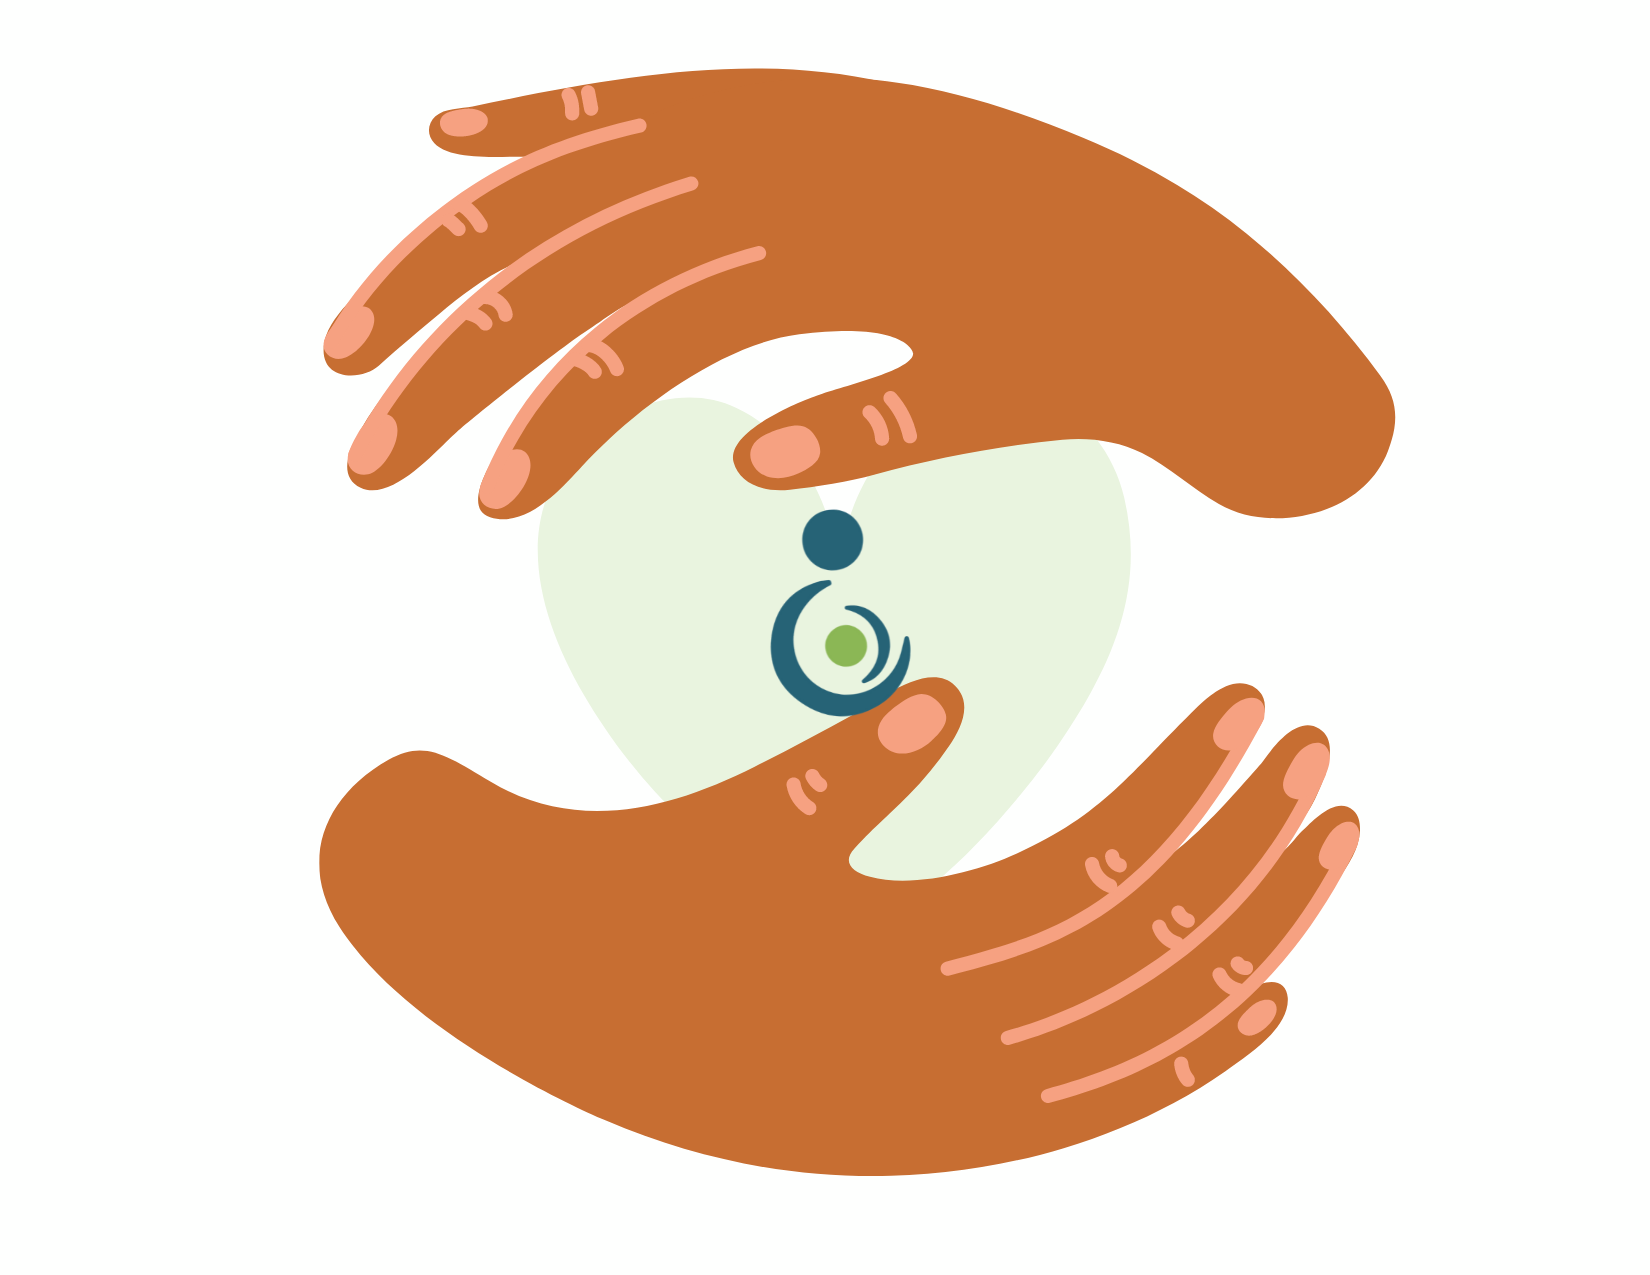 illustrated image of hands wrapped around a small heart that has the Pregnancy HUB logo in the middle of the heart.